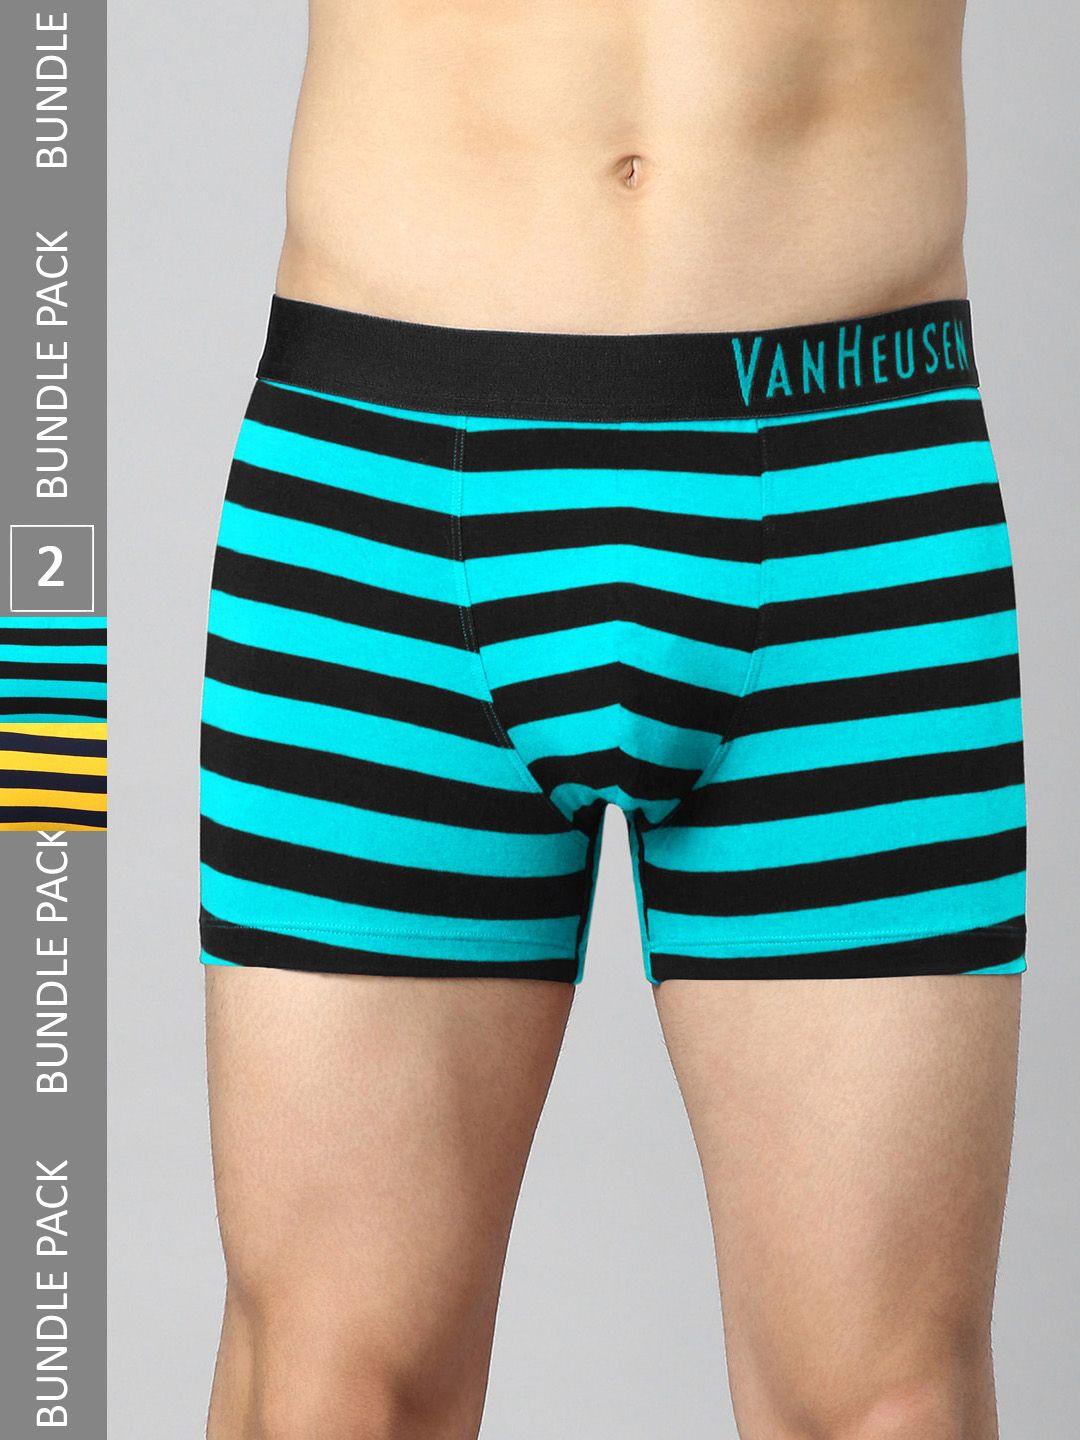 van-heusen-pack-of-2-striped-low-rise-trunks-ihqtr2c310055